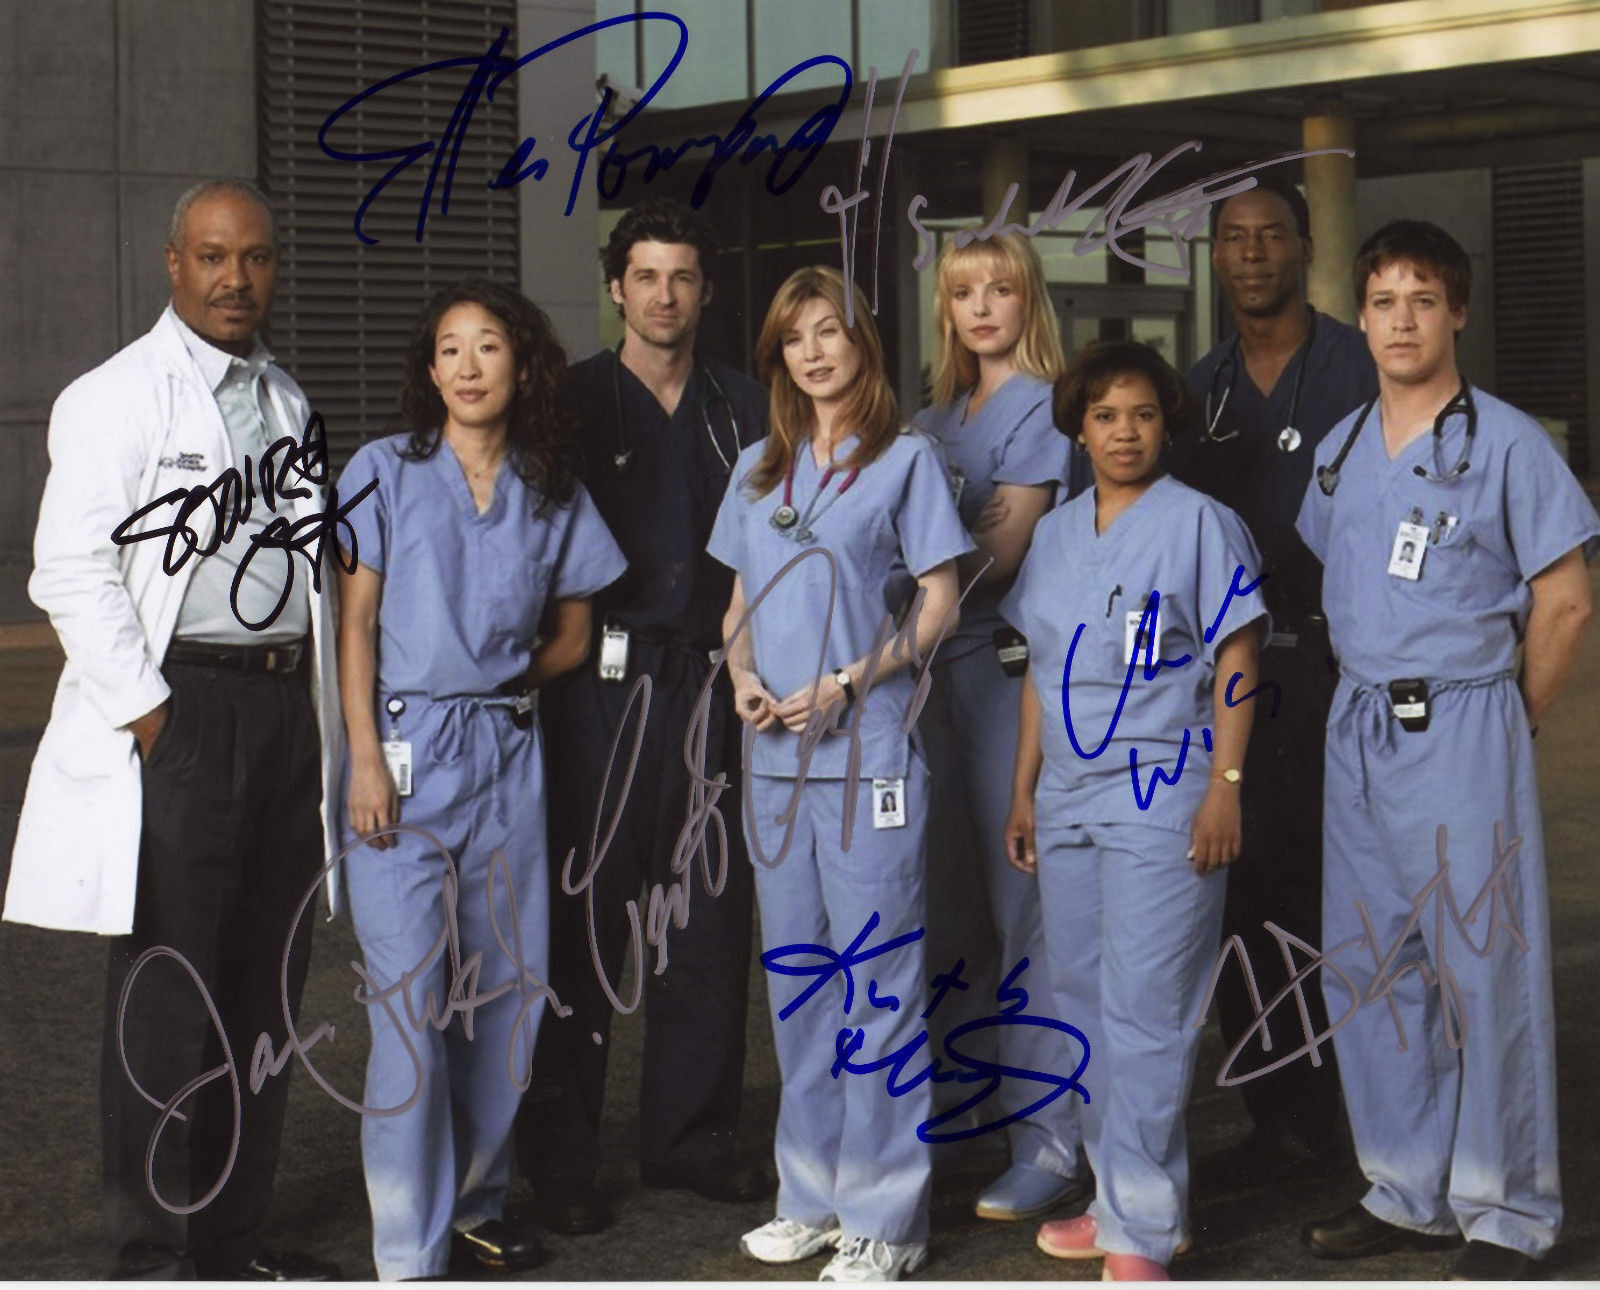 GREYS ANATOMY AUTOGRAPH SIGNED PP Photo Poster painting POSTER